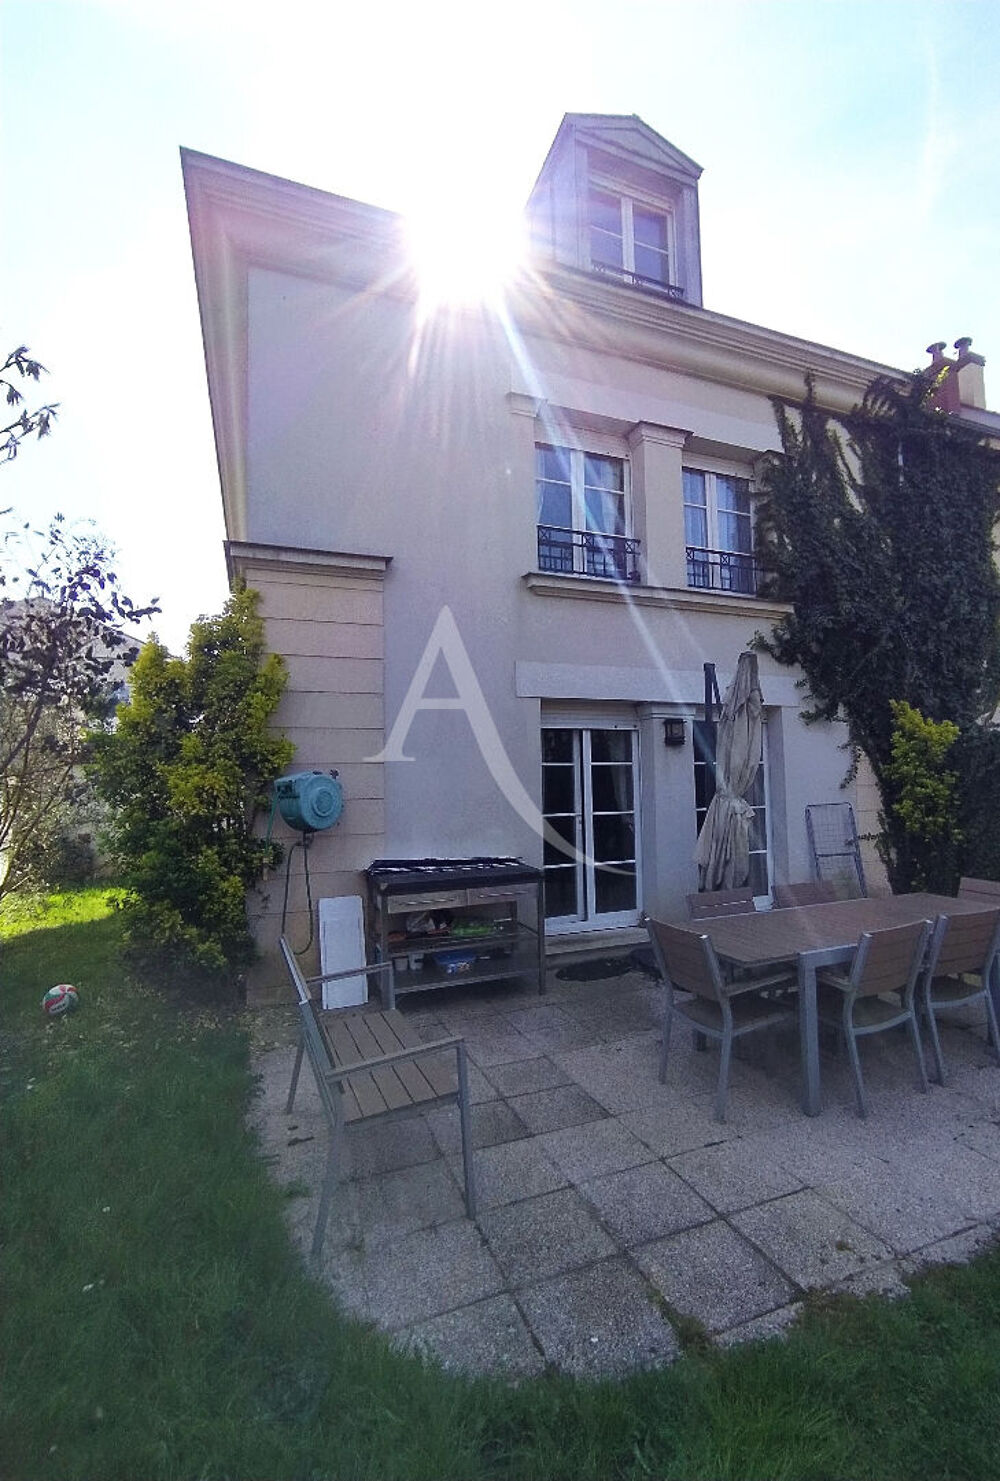 Vente Maison Maison Bailly Romainvilliers 8 pice(s)  141m Bailly romainvilliers